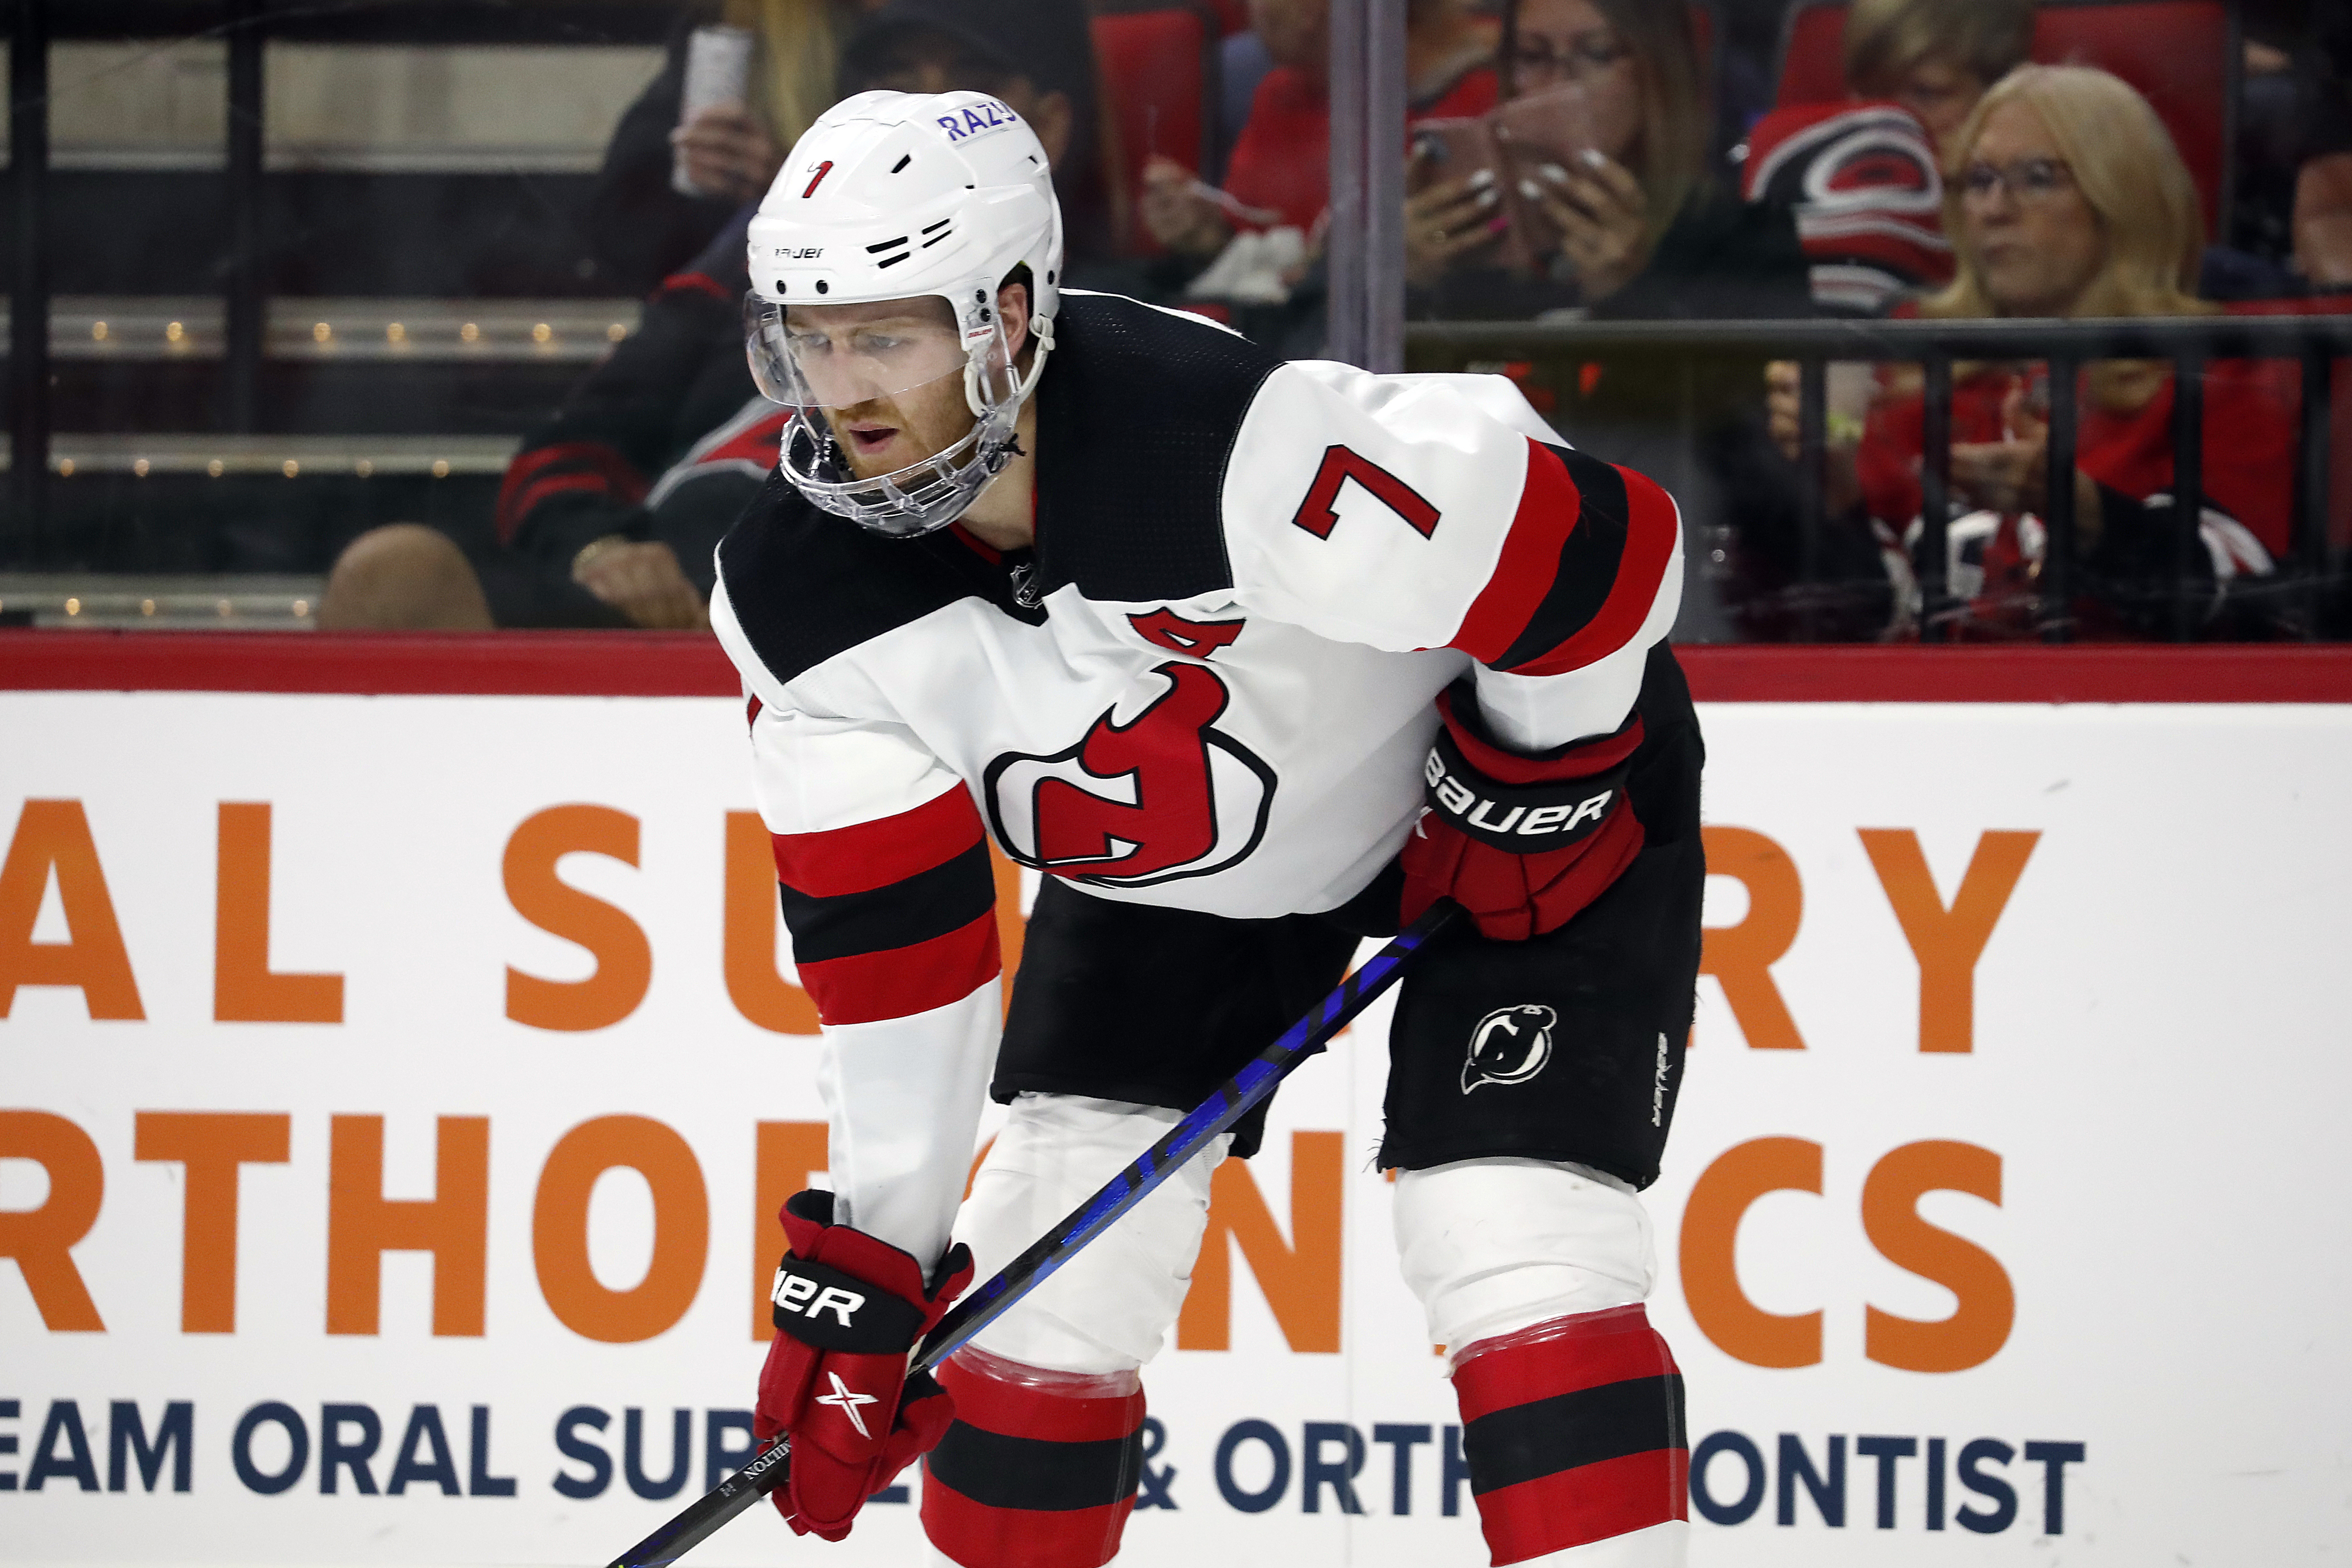 New Jersey Devils: Dougie Hamilton 2021 - Officially Licensed NHL